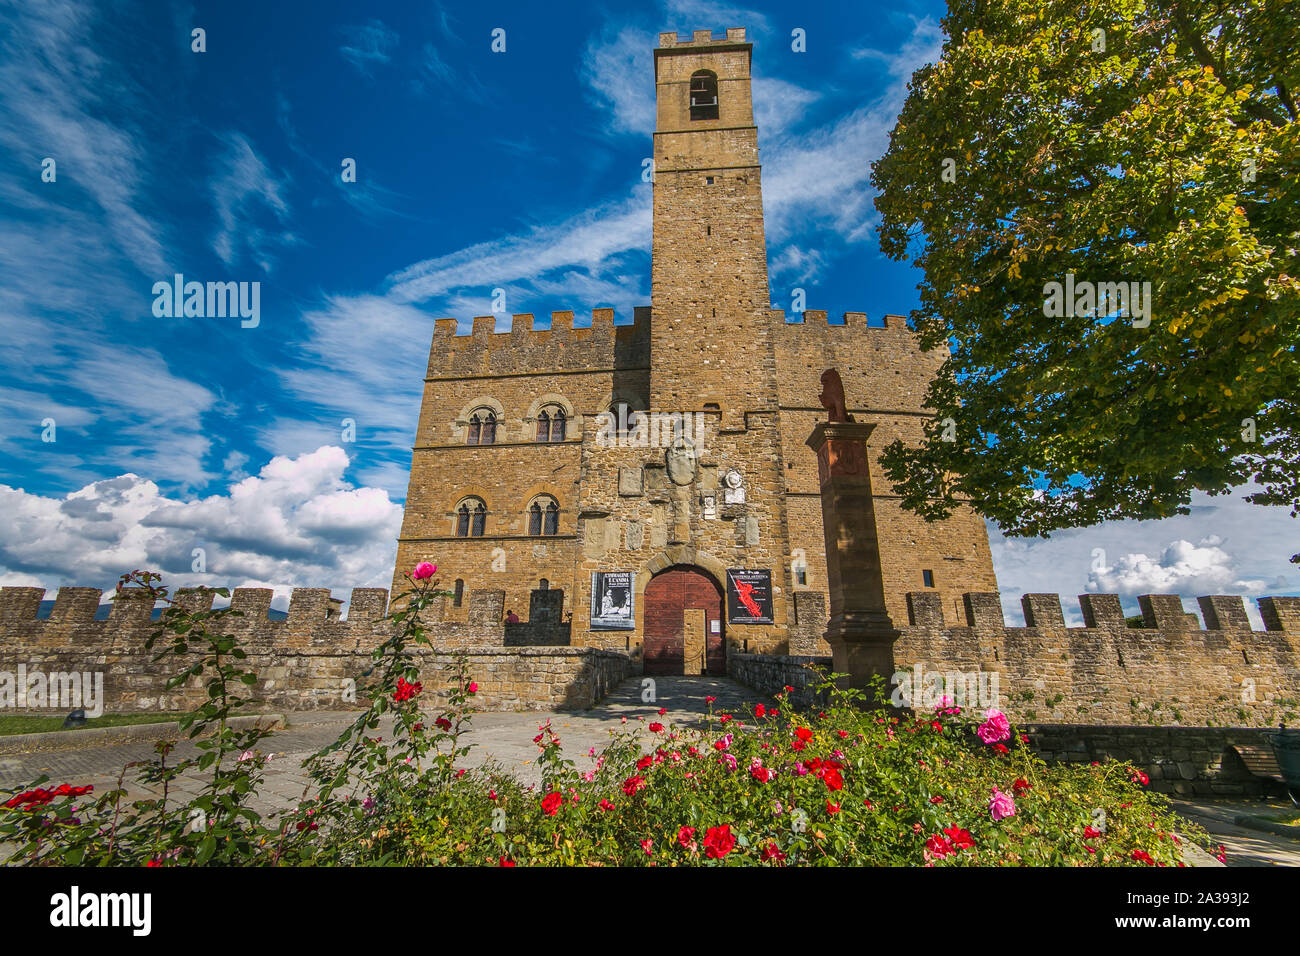 POPPI, ITALY - OCTOBEER 6, 2019: Poppi castle or the Castello dei Conti Guidi) is a medieval castle in Poppi, Tuscany, Italy, formerly the property of Stock Photo